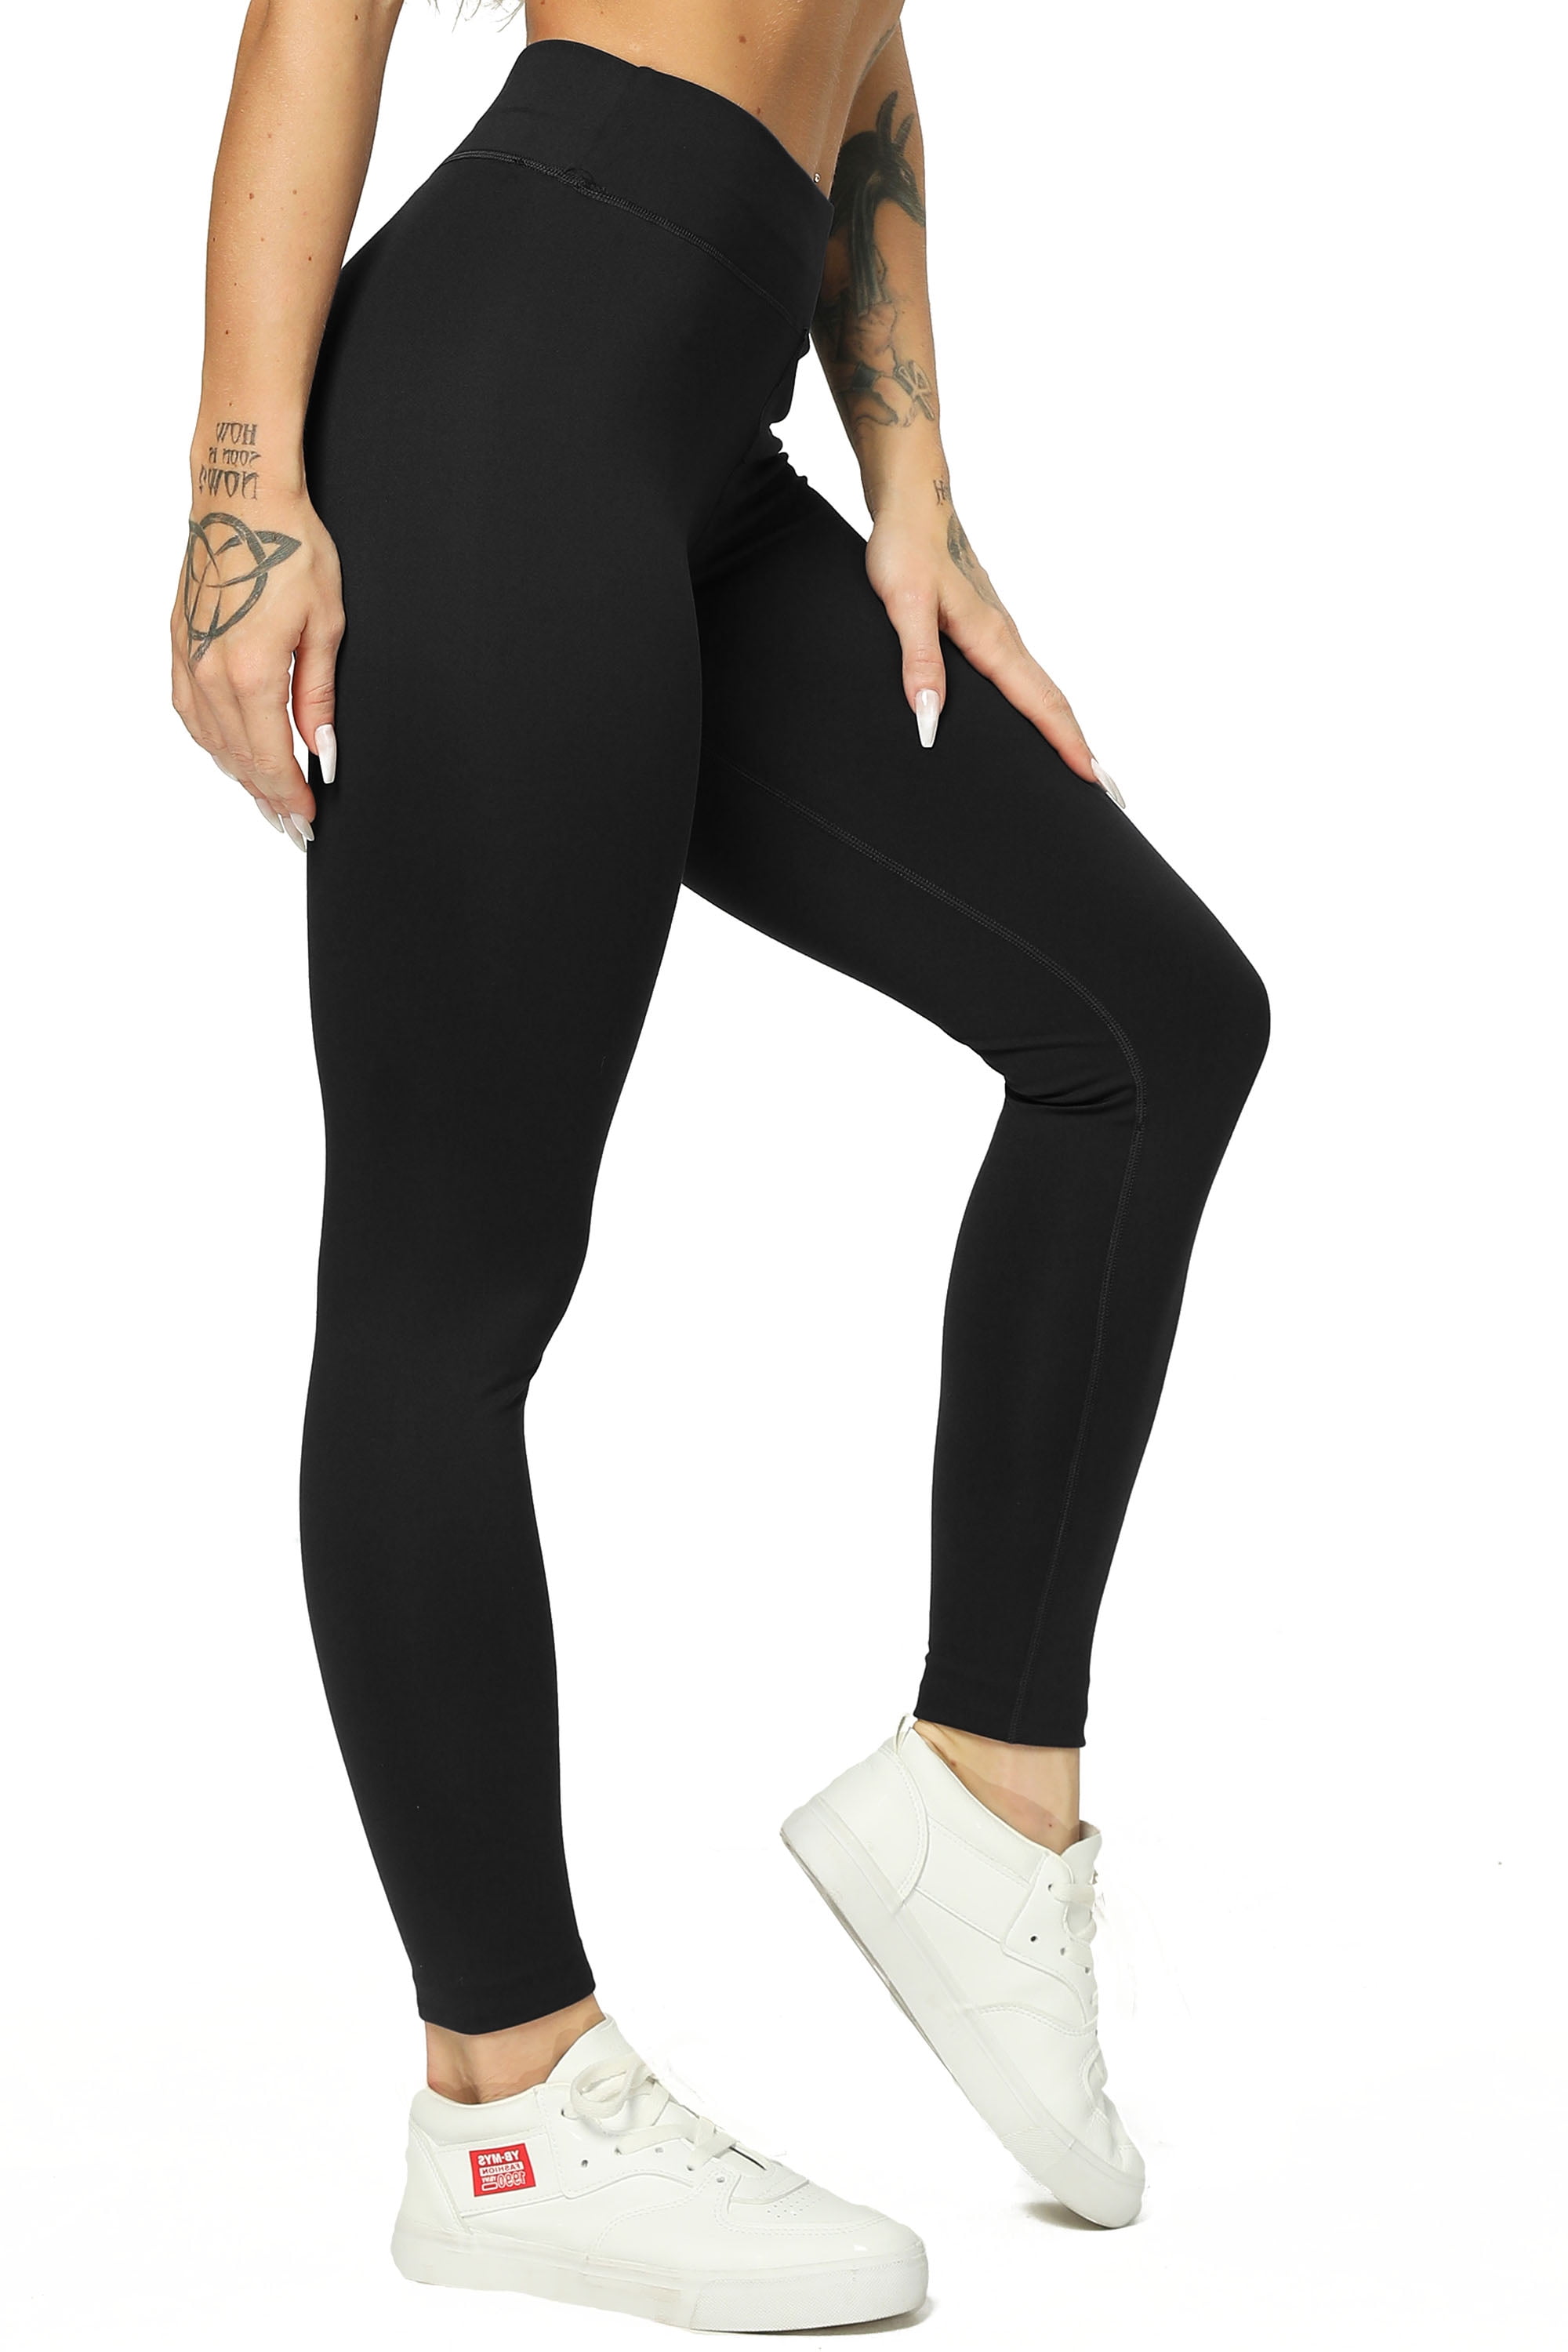 IUGA High Waist Yoga Pants with Pockets, Leggings for Women Tummy Control, Workout  Leggings for Women 4 Way Stretch, Dark Coffee, Small : : Clothing,  Shoes & Accessories